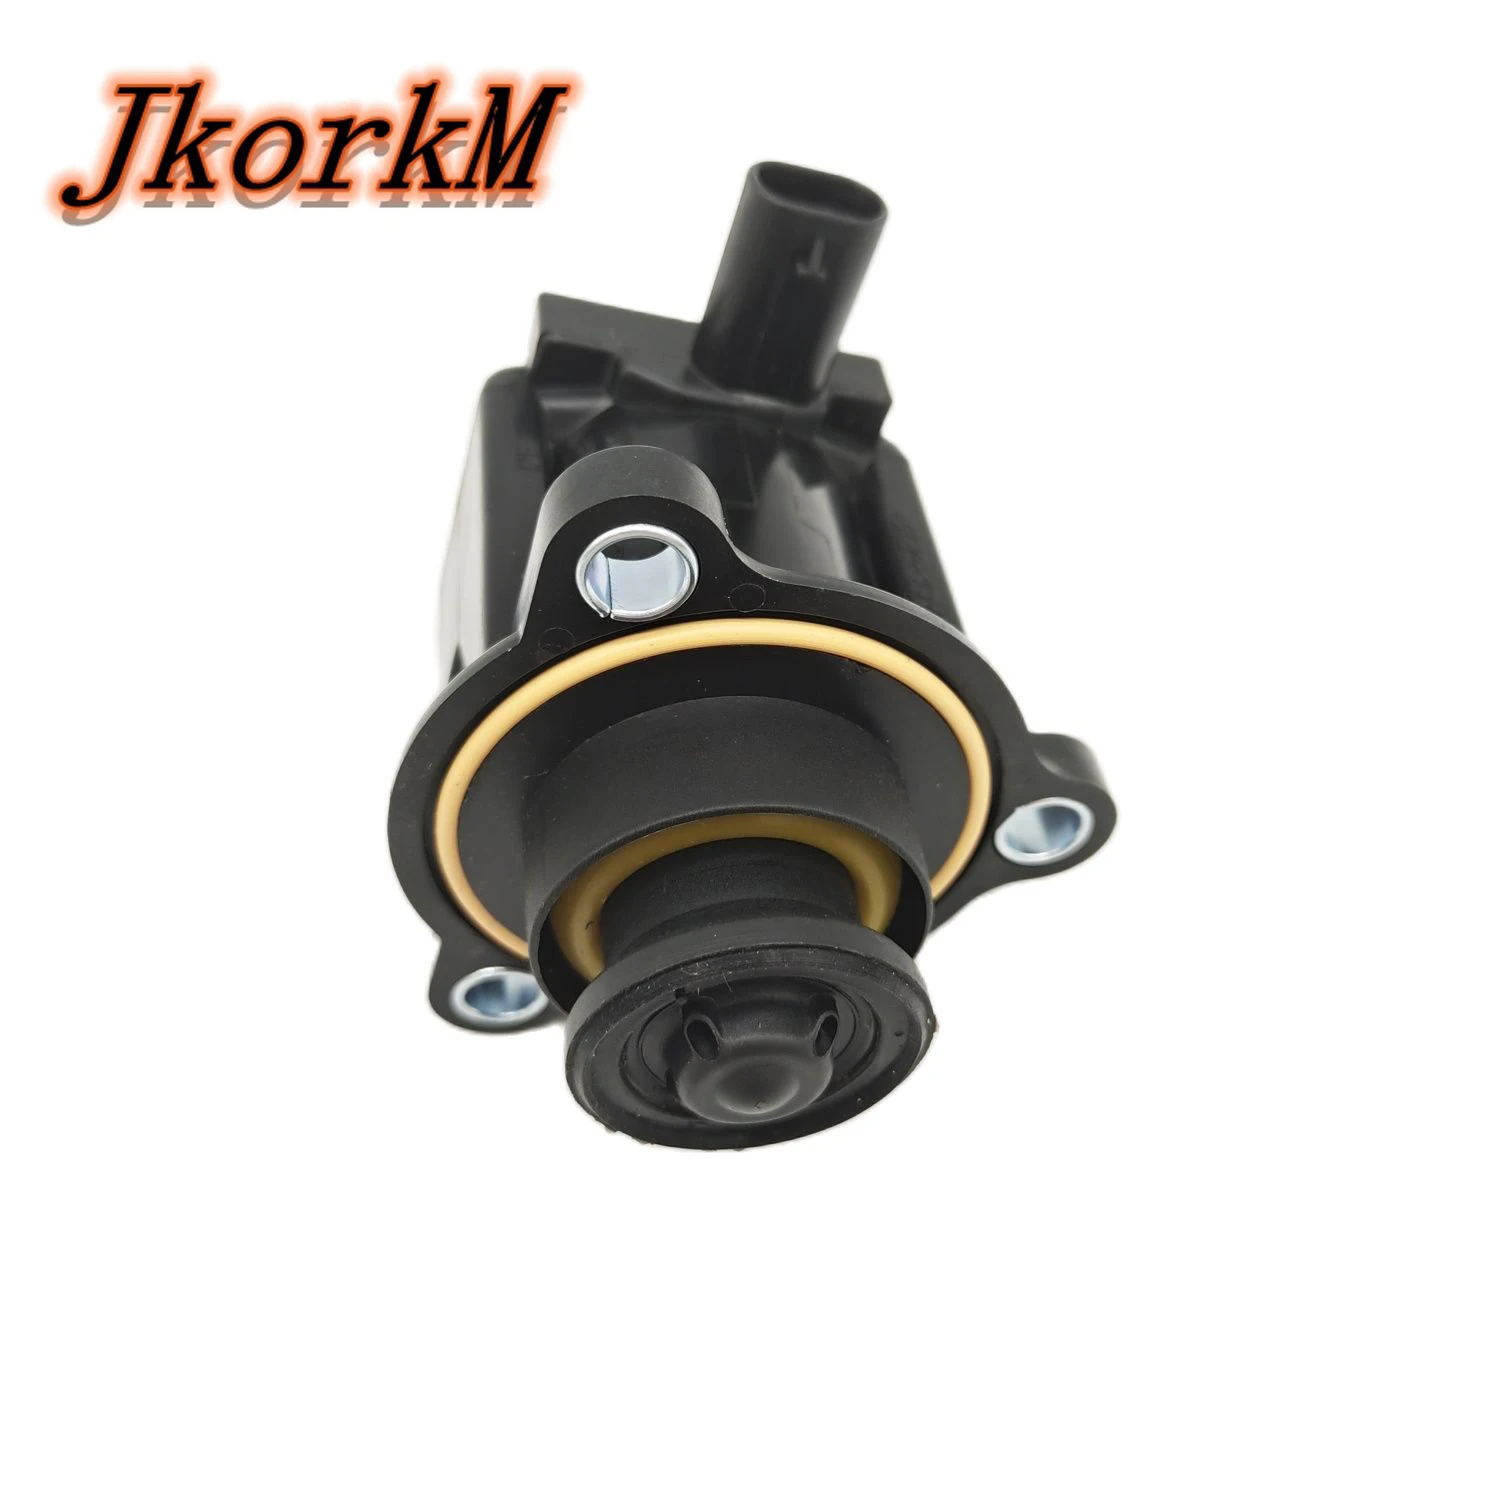 

Turbocharger SOLENOID Valve 70187002 0001531159 A0001531159 For Mercedes Benz Blow Off Valve Adapter W246 W212 W207 W204